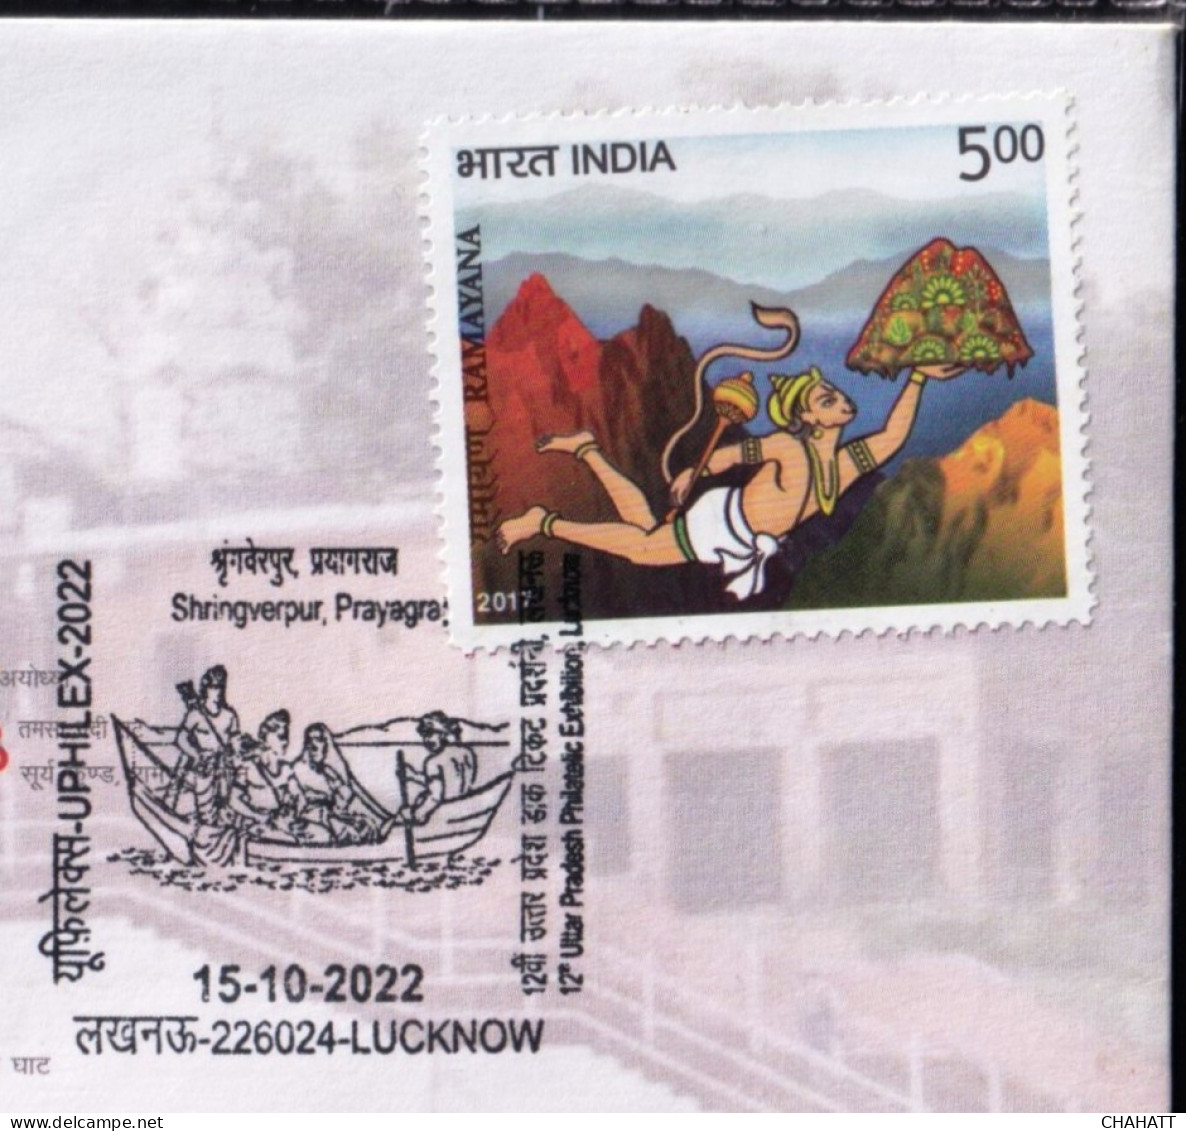 HINDUISM - RAMAYAN- SRINGESWAR- RIVER CROSSING BY BOAT - PICTORIAL CANCELLATION - SPECIAL COVER - INDIA -2022- BX4-23 - Hindoeïsme